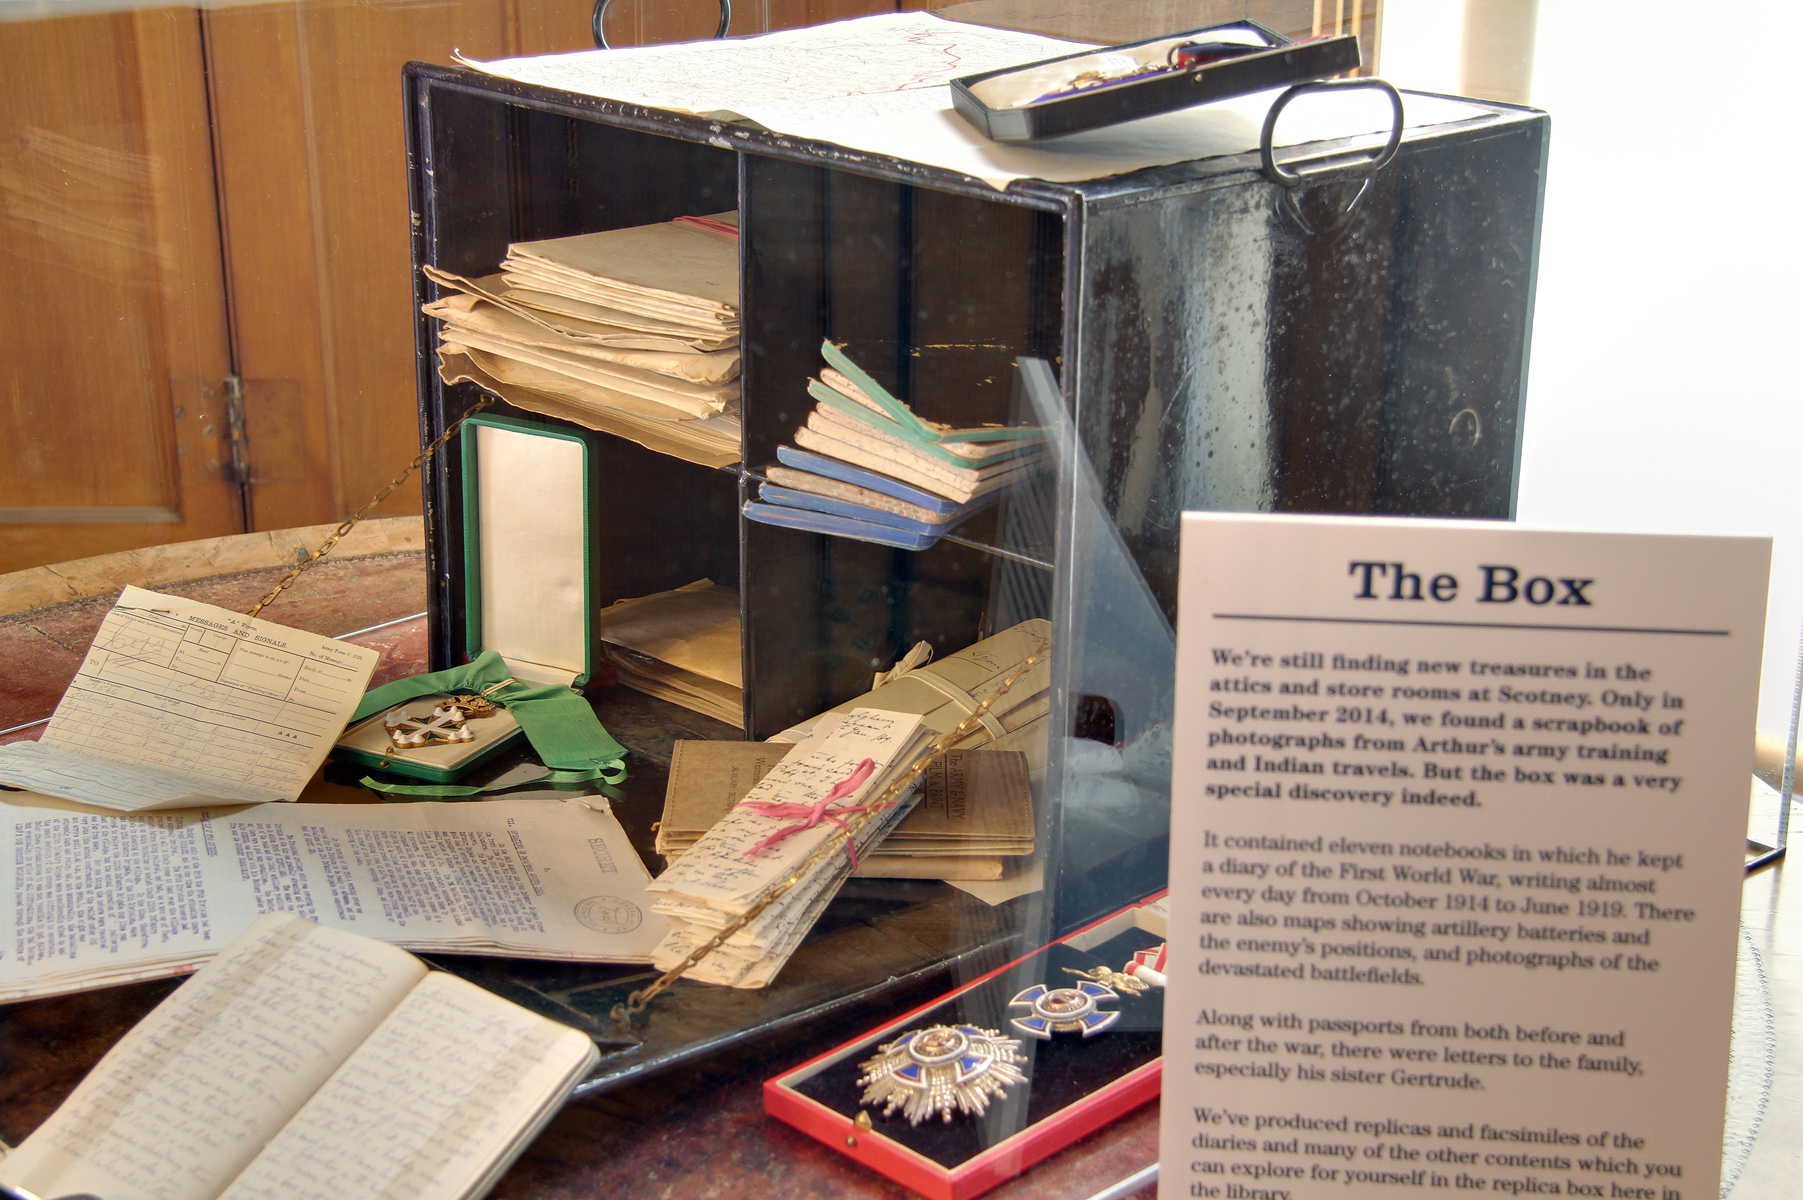 The original box containing Arthur’s diaries and papers.